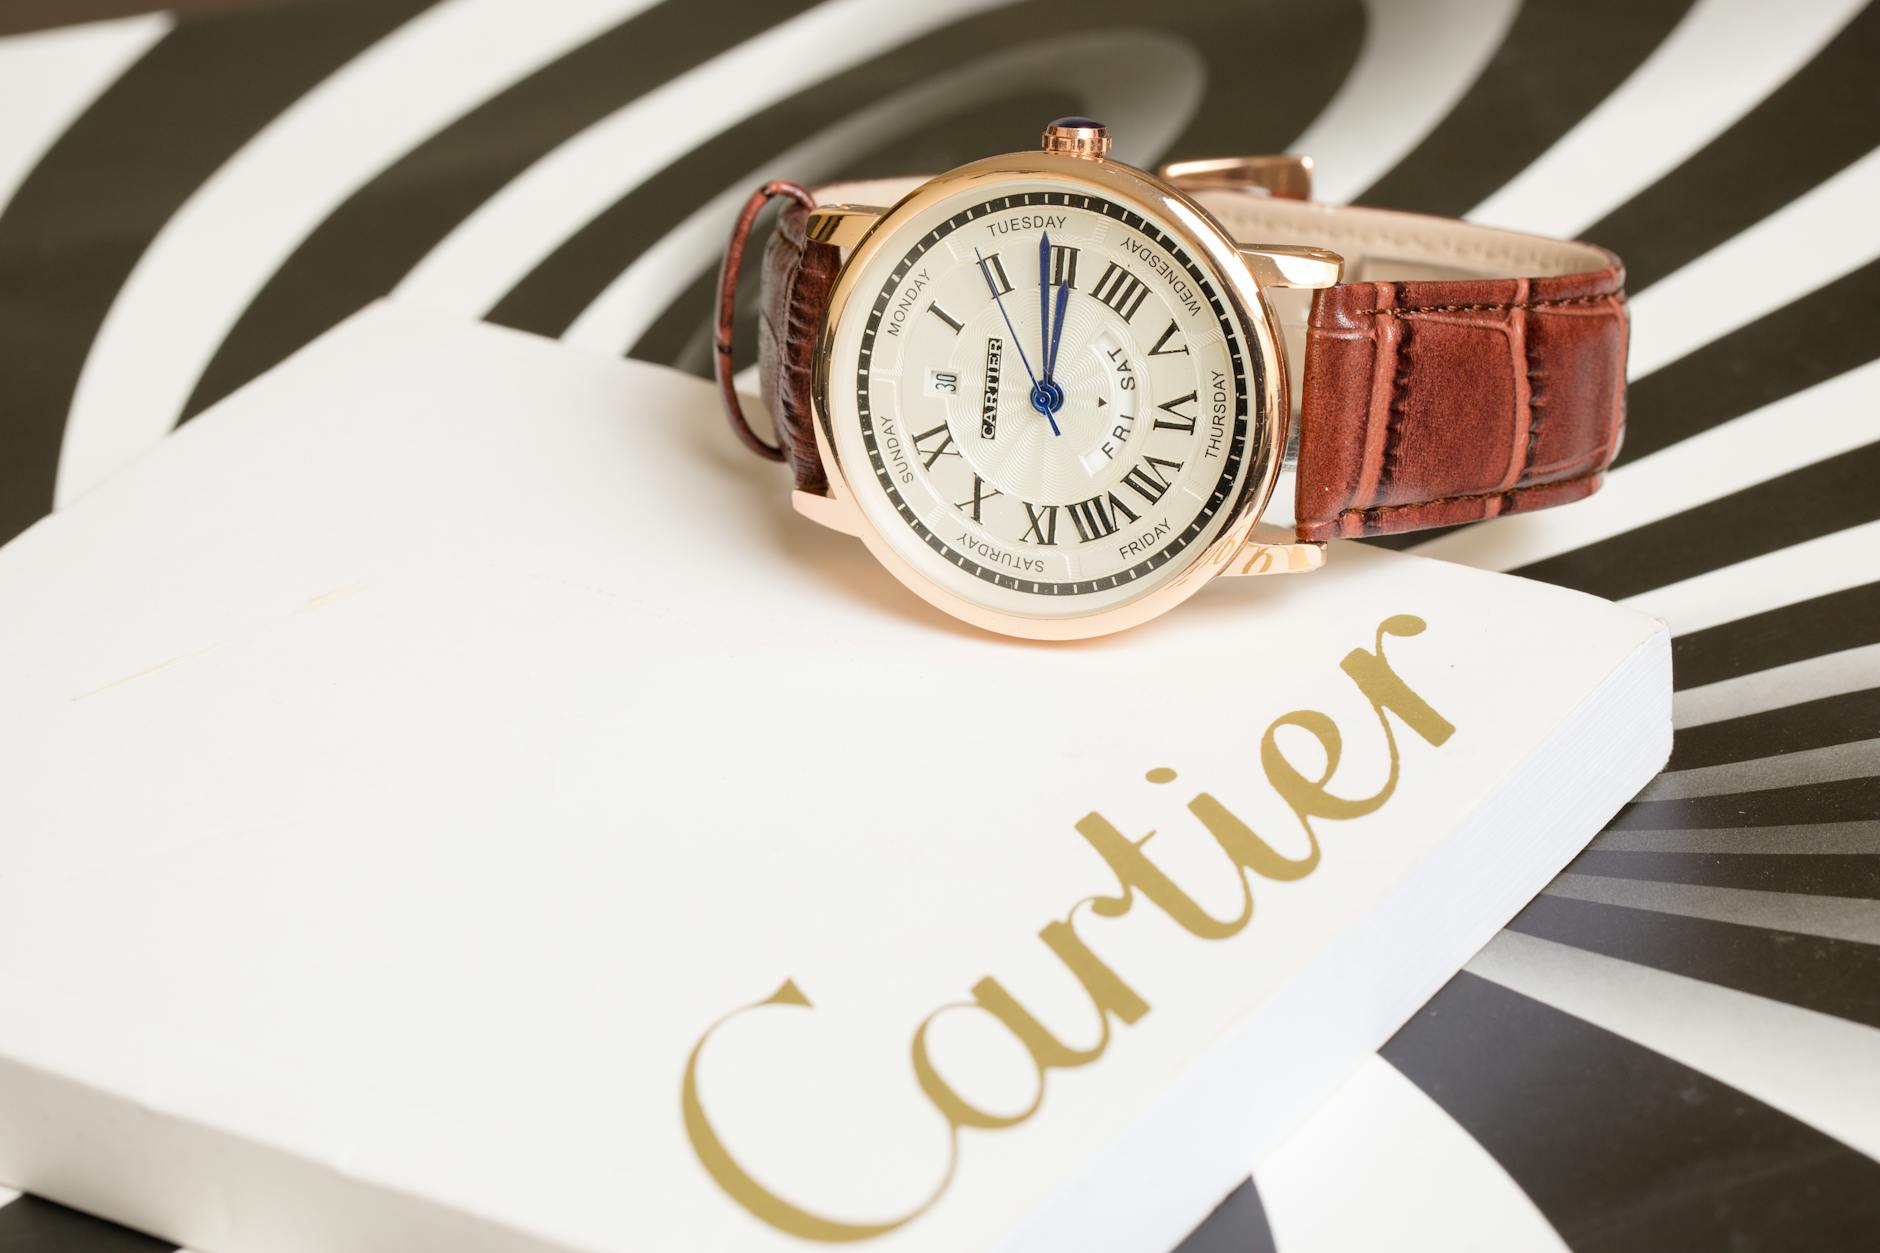 Cartier Watch and Decorative Packing Box with Logo